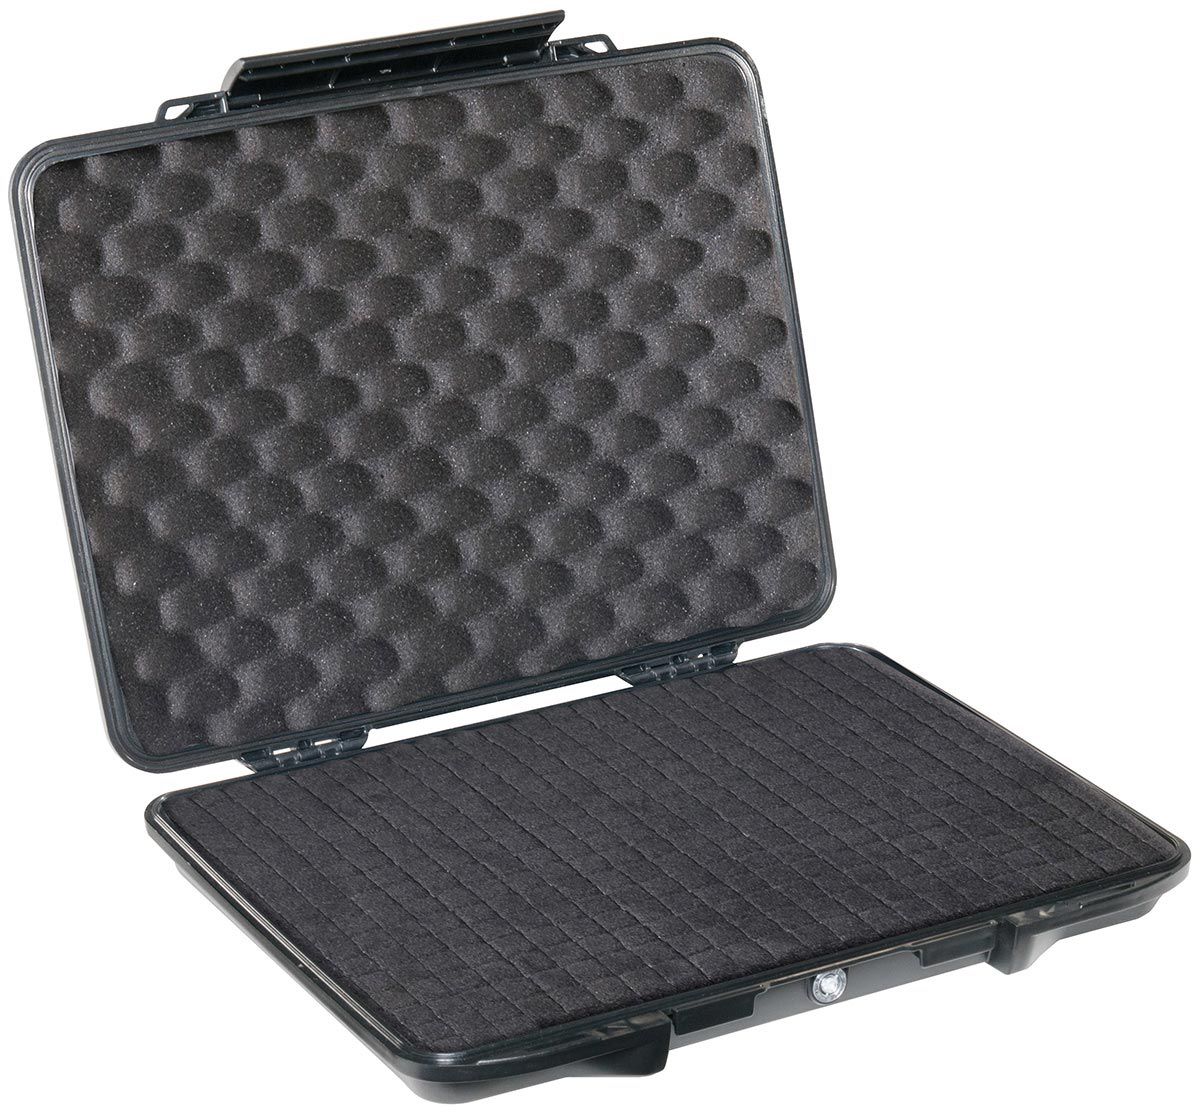 These days, a student’s laptop is hugely important. Keep it protected with a hard case from Pelican.